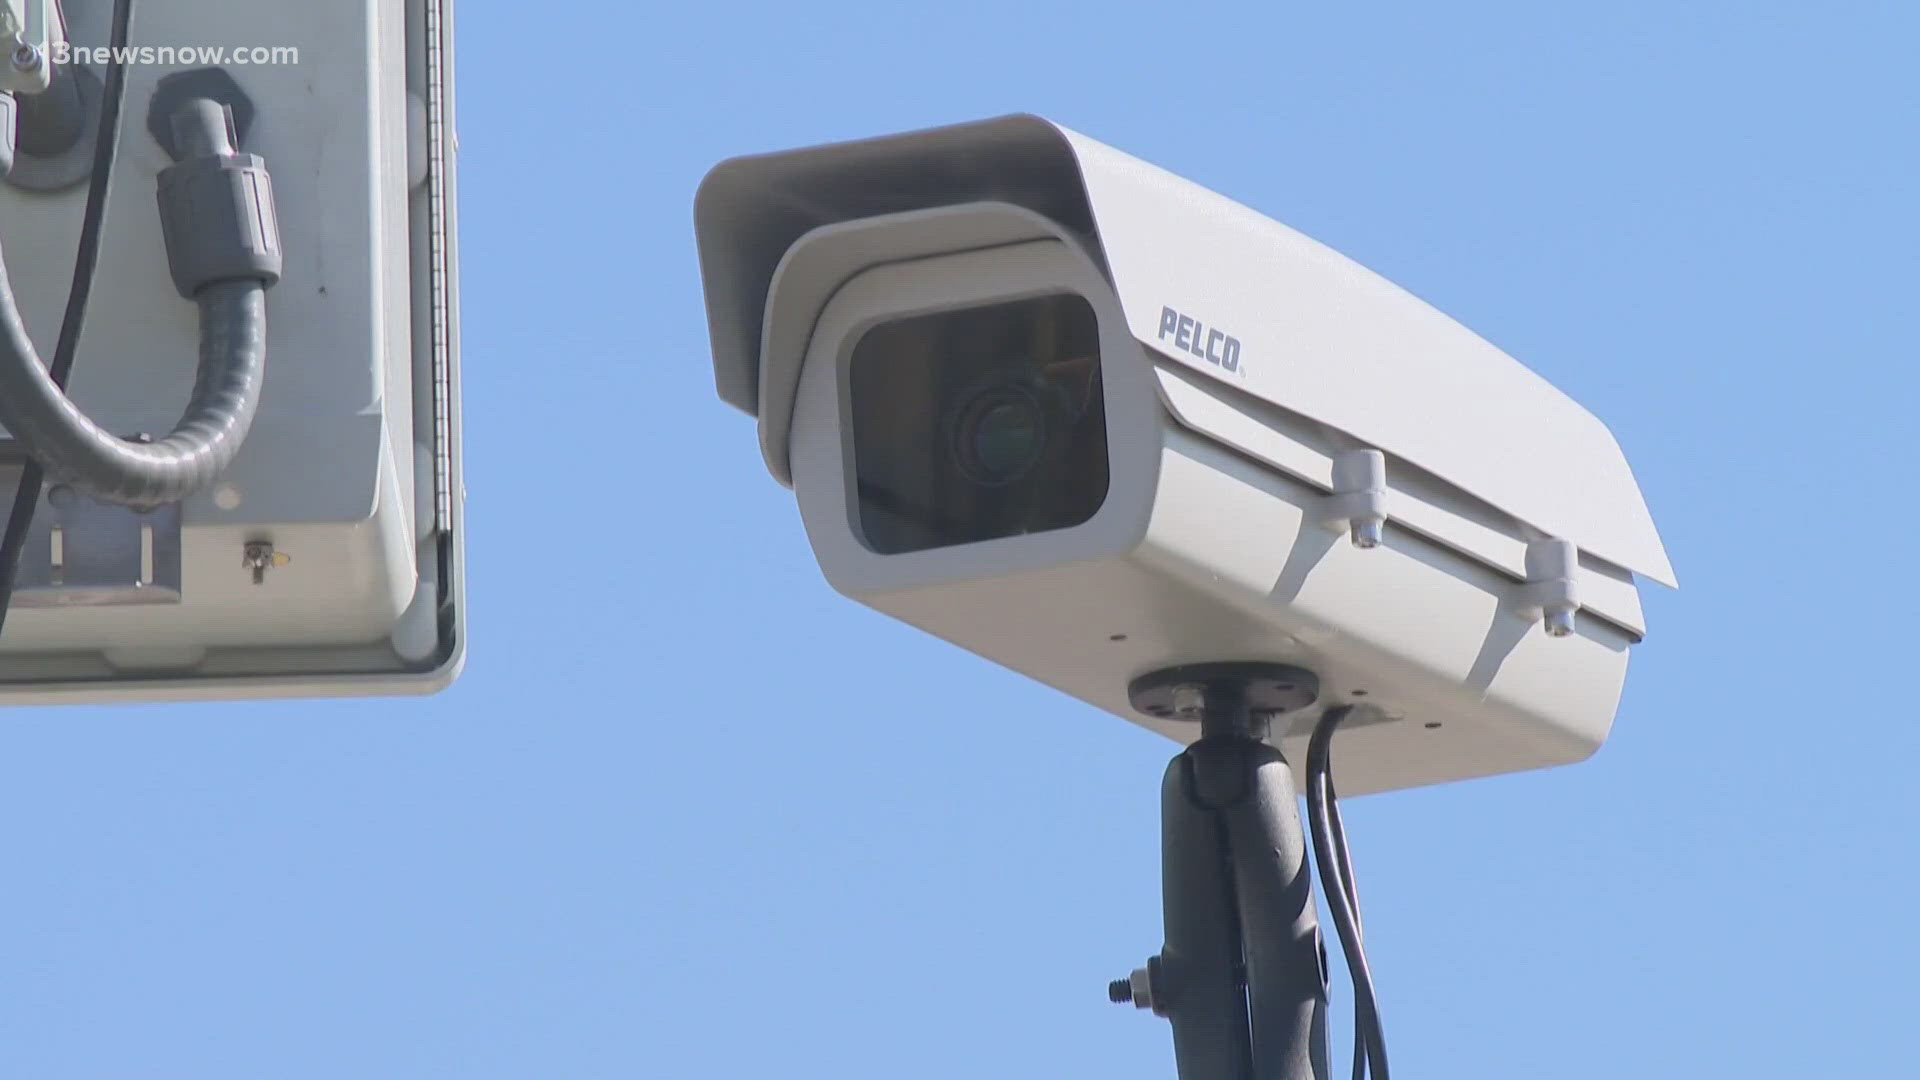 Two new lawsuits in Hampton Roads aim to take down recently installed speed cameras.